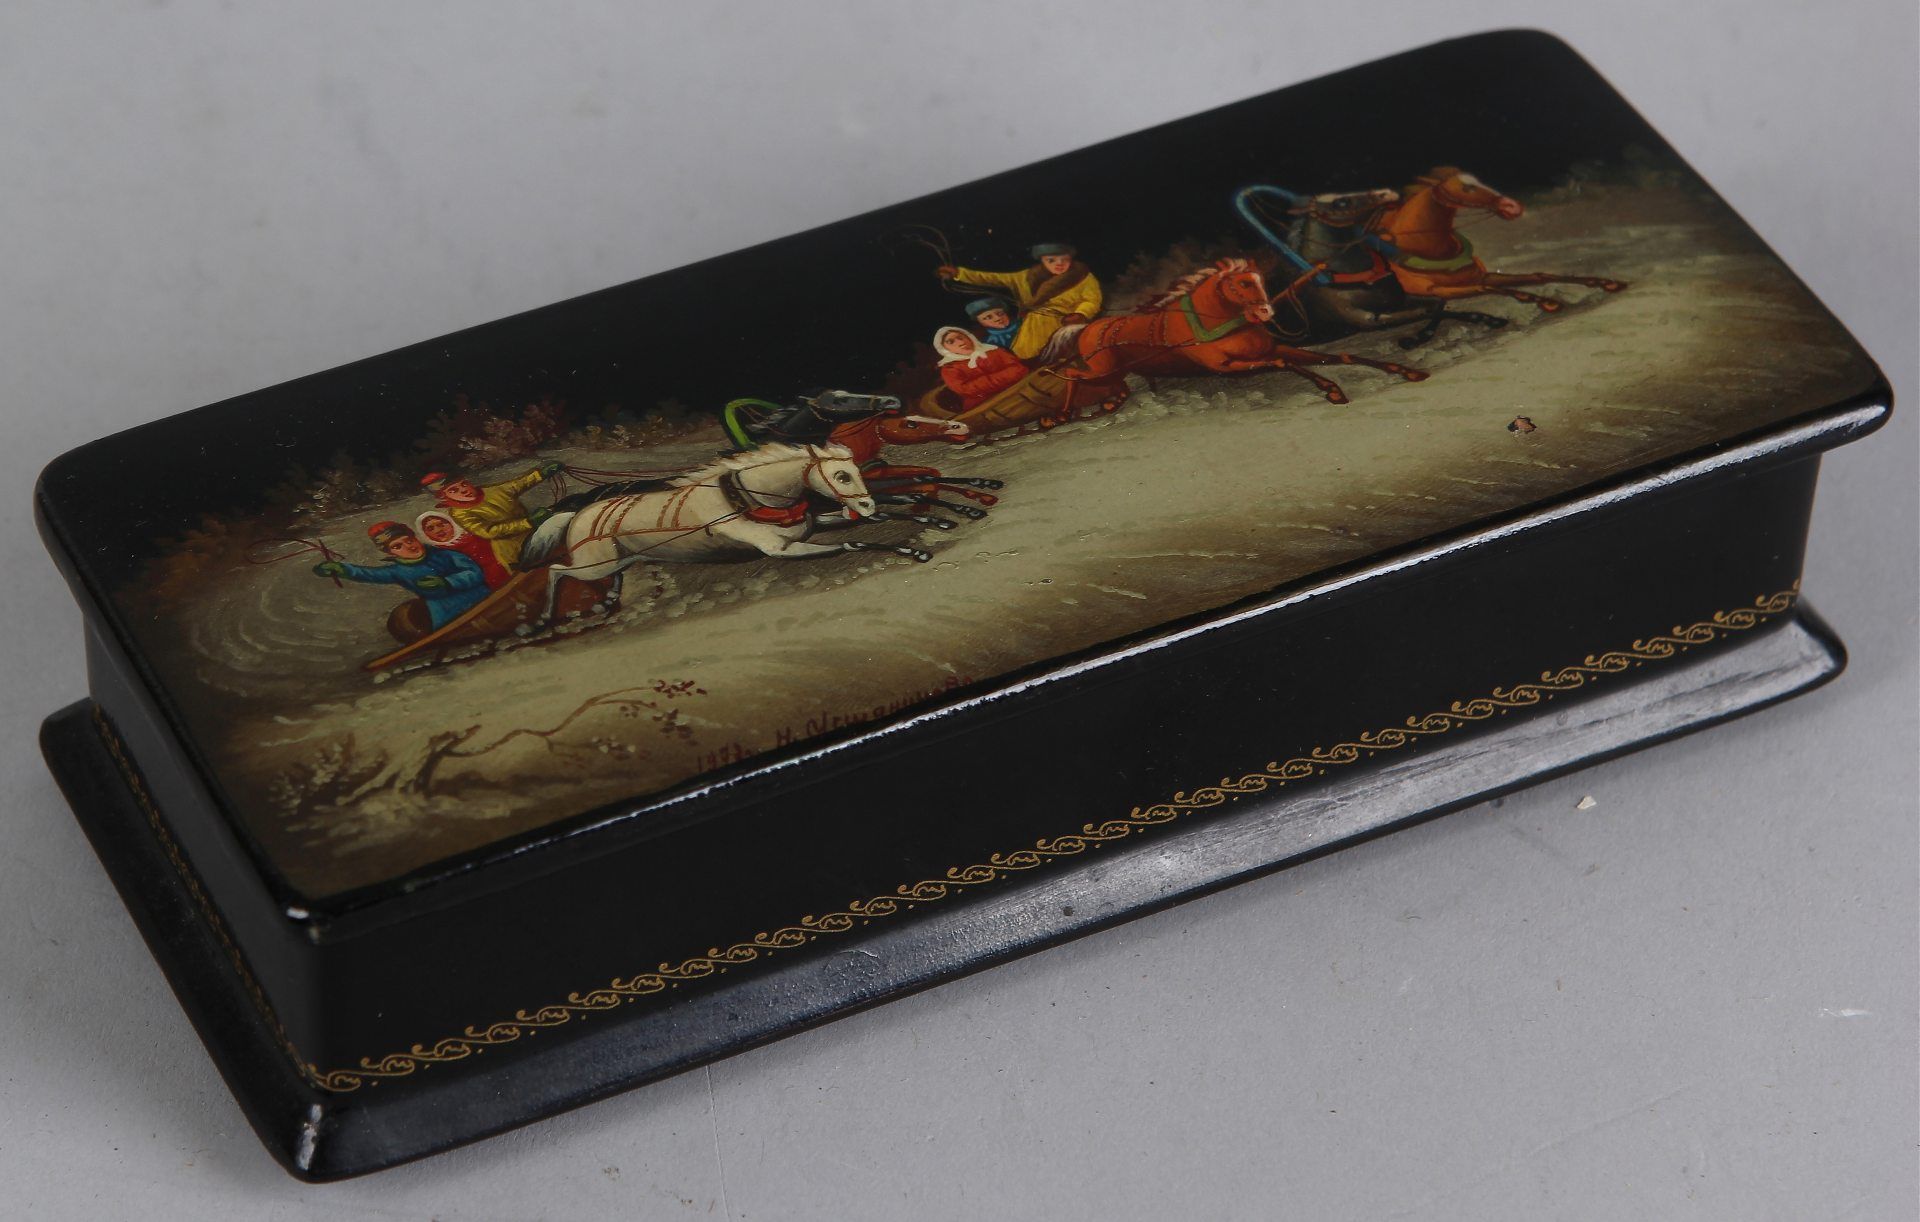 Old Russian lacquer box painted, signed in 1972, with sleigh race performance, good condition 4x16,